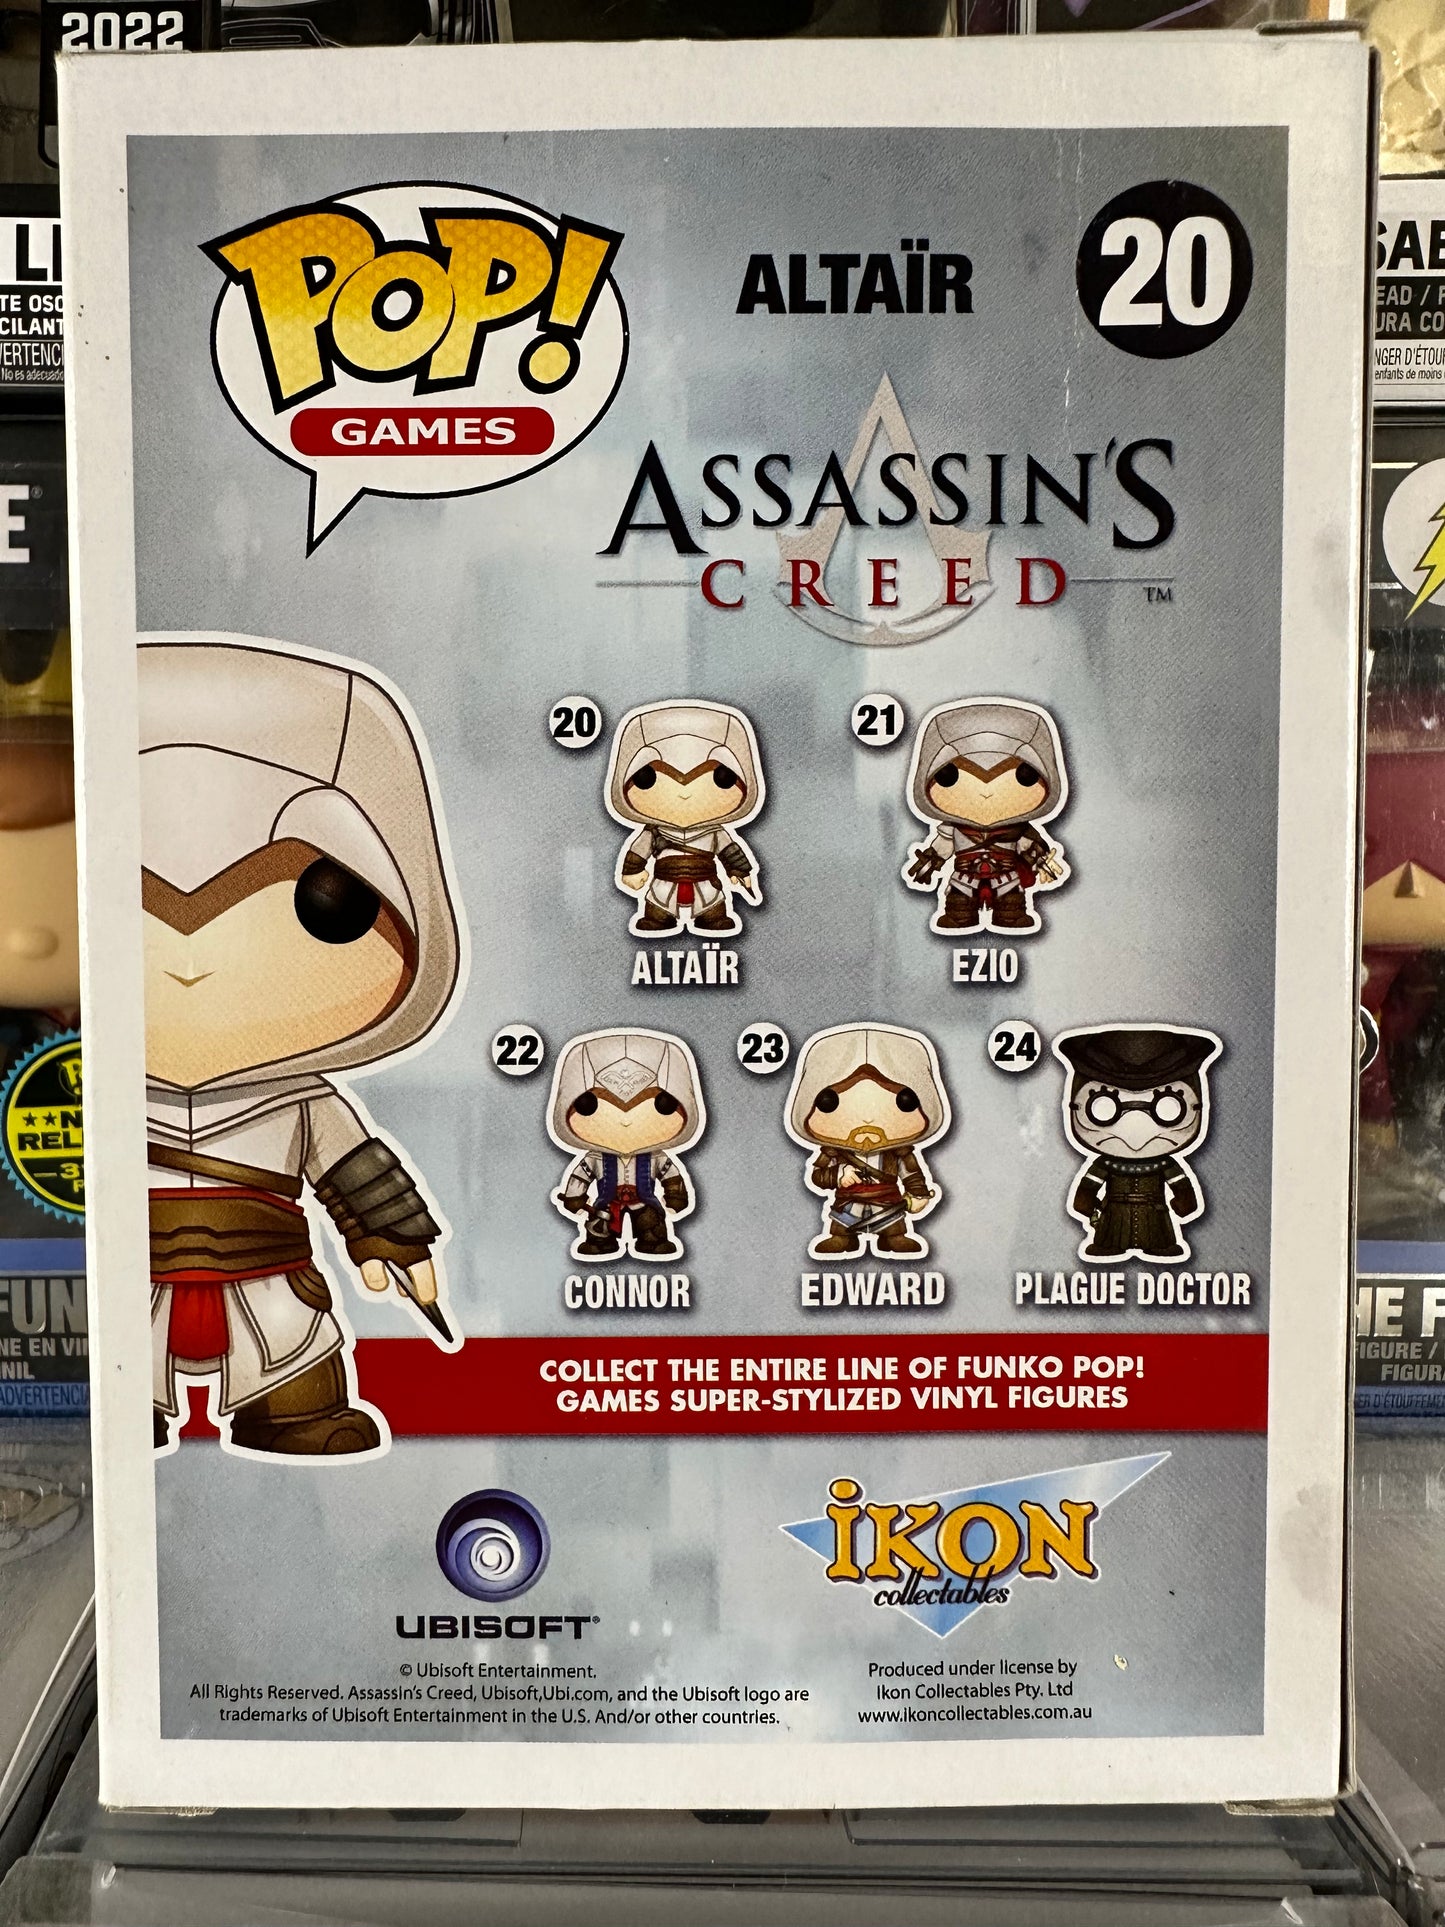 Assassin's Creed - Altair (20) Vaulted